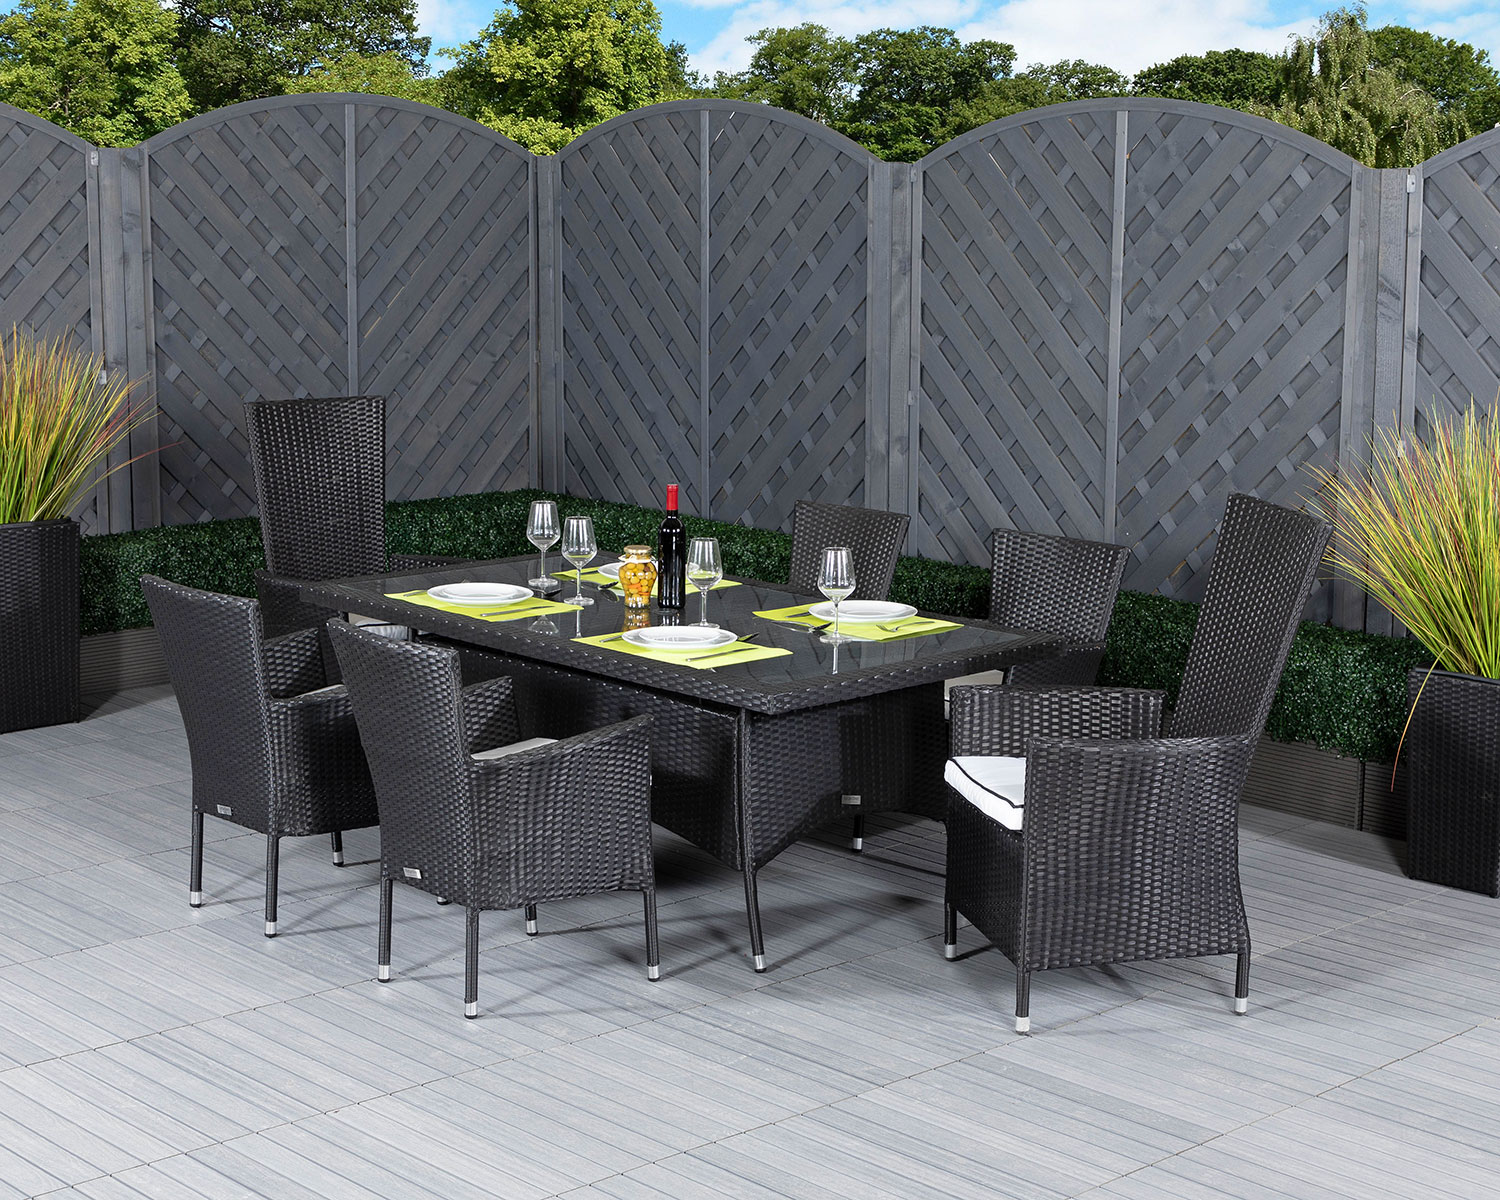 Rattan Garden Dining Set With Reclining Chairs In Black Amp White Cambridge Rattan Direct